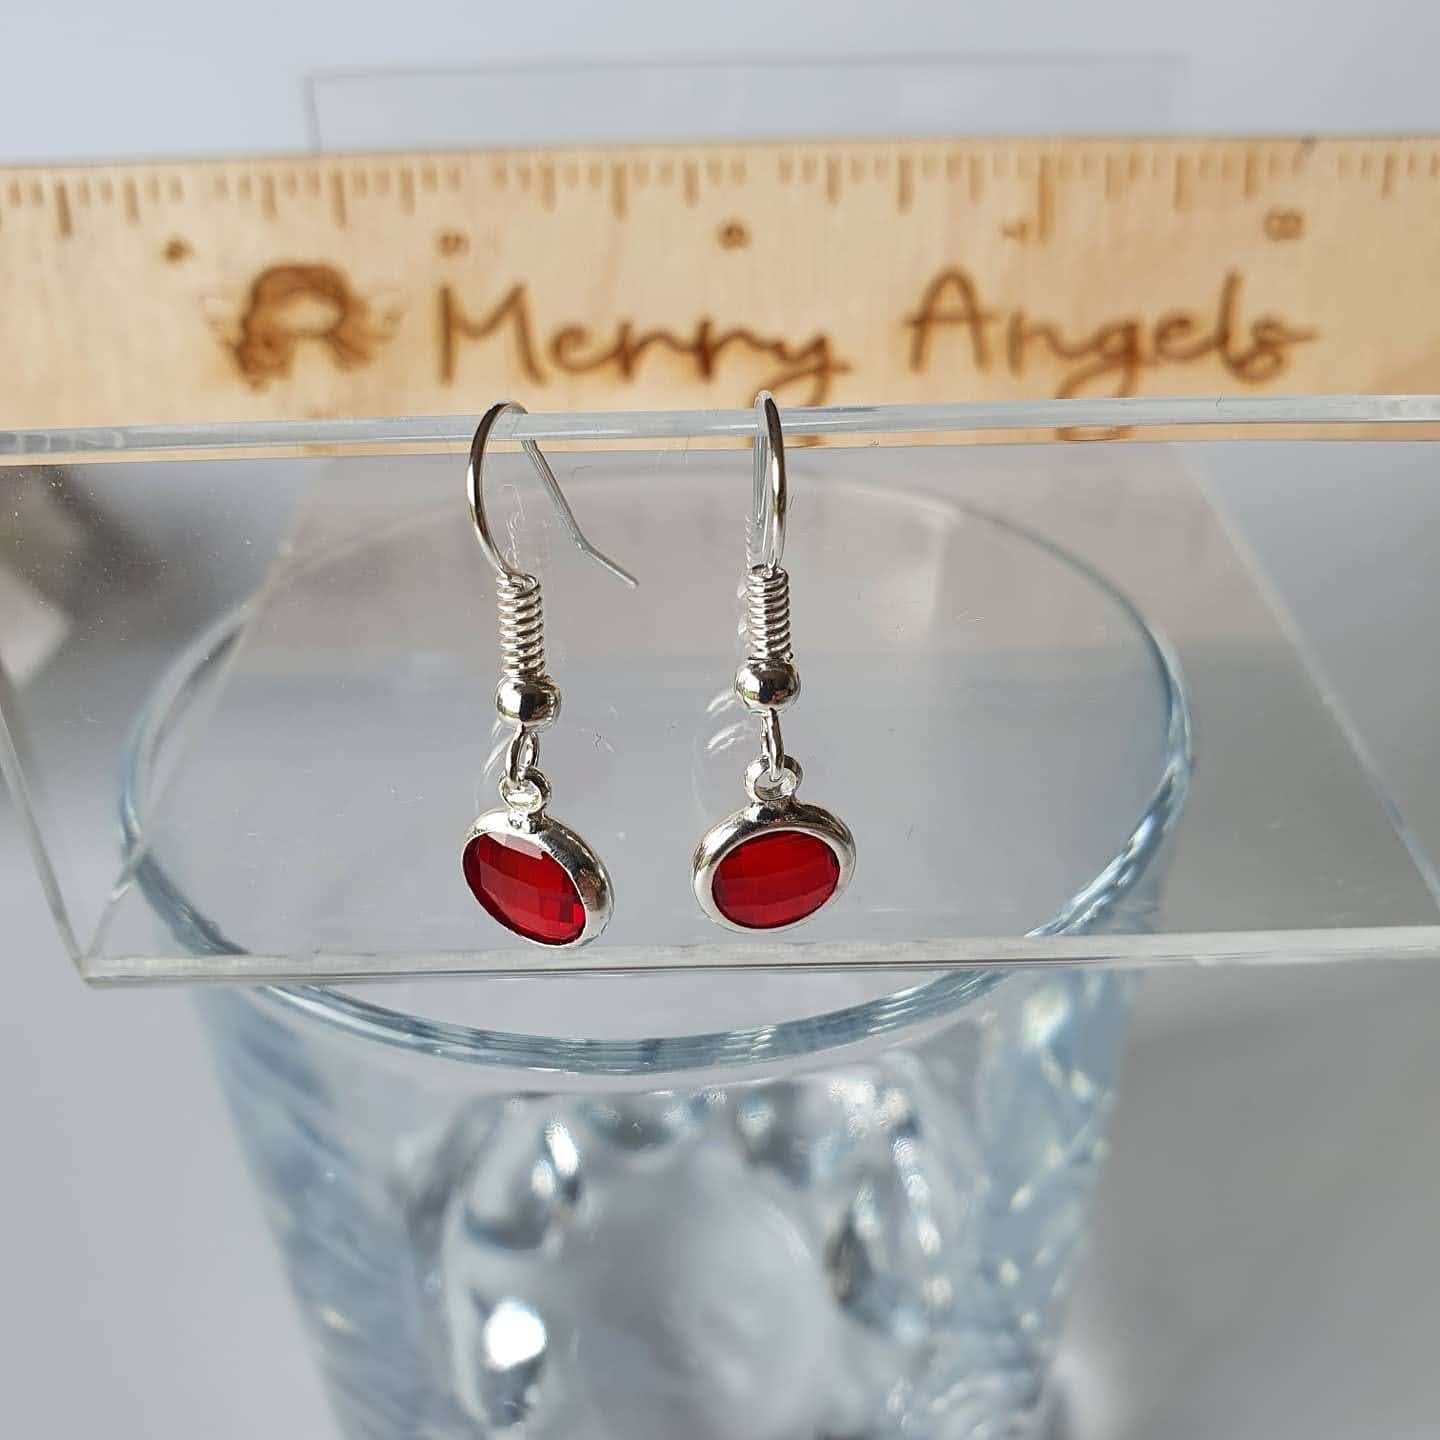 This is a picture of a pair of red earrings hanging over a wine glass